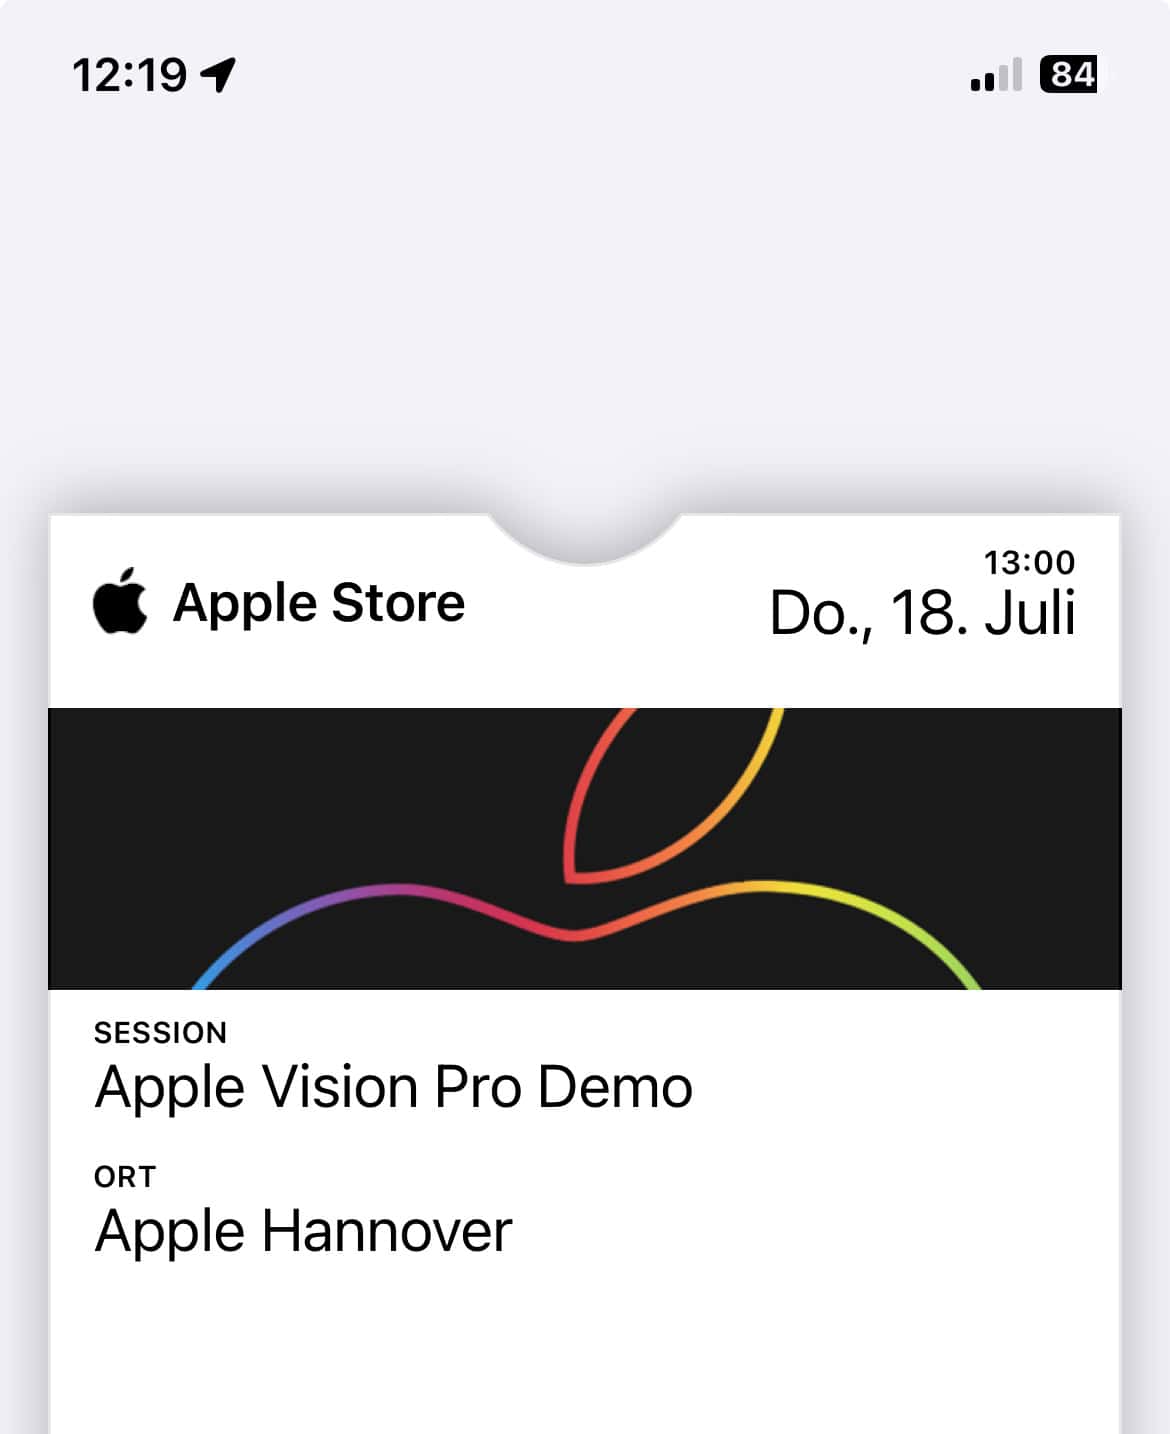 Apple Vision Pro Drmo Voucher in Wallet.